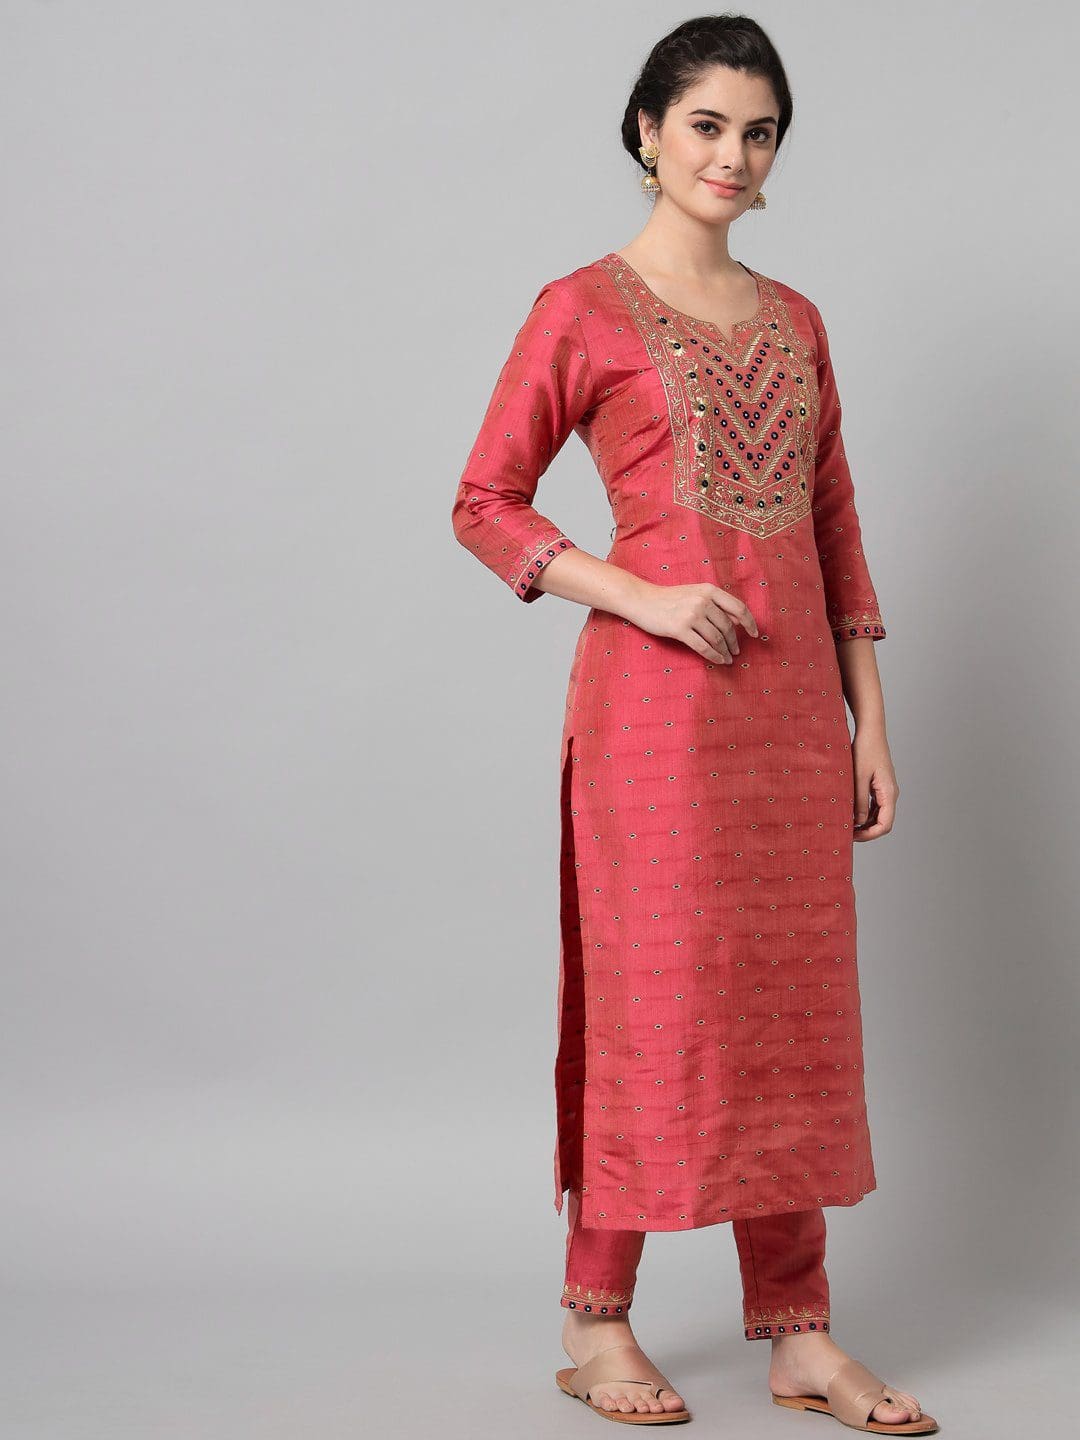 Stunning Rayon Fabric Color Magenta Kurta And Trouser Set With Zari Embroidery For Women